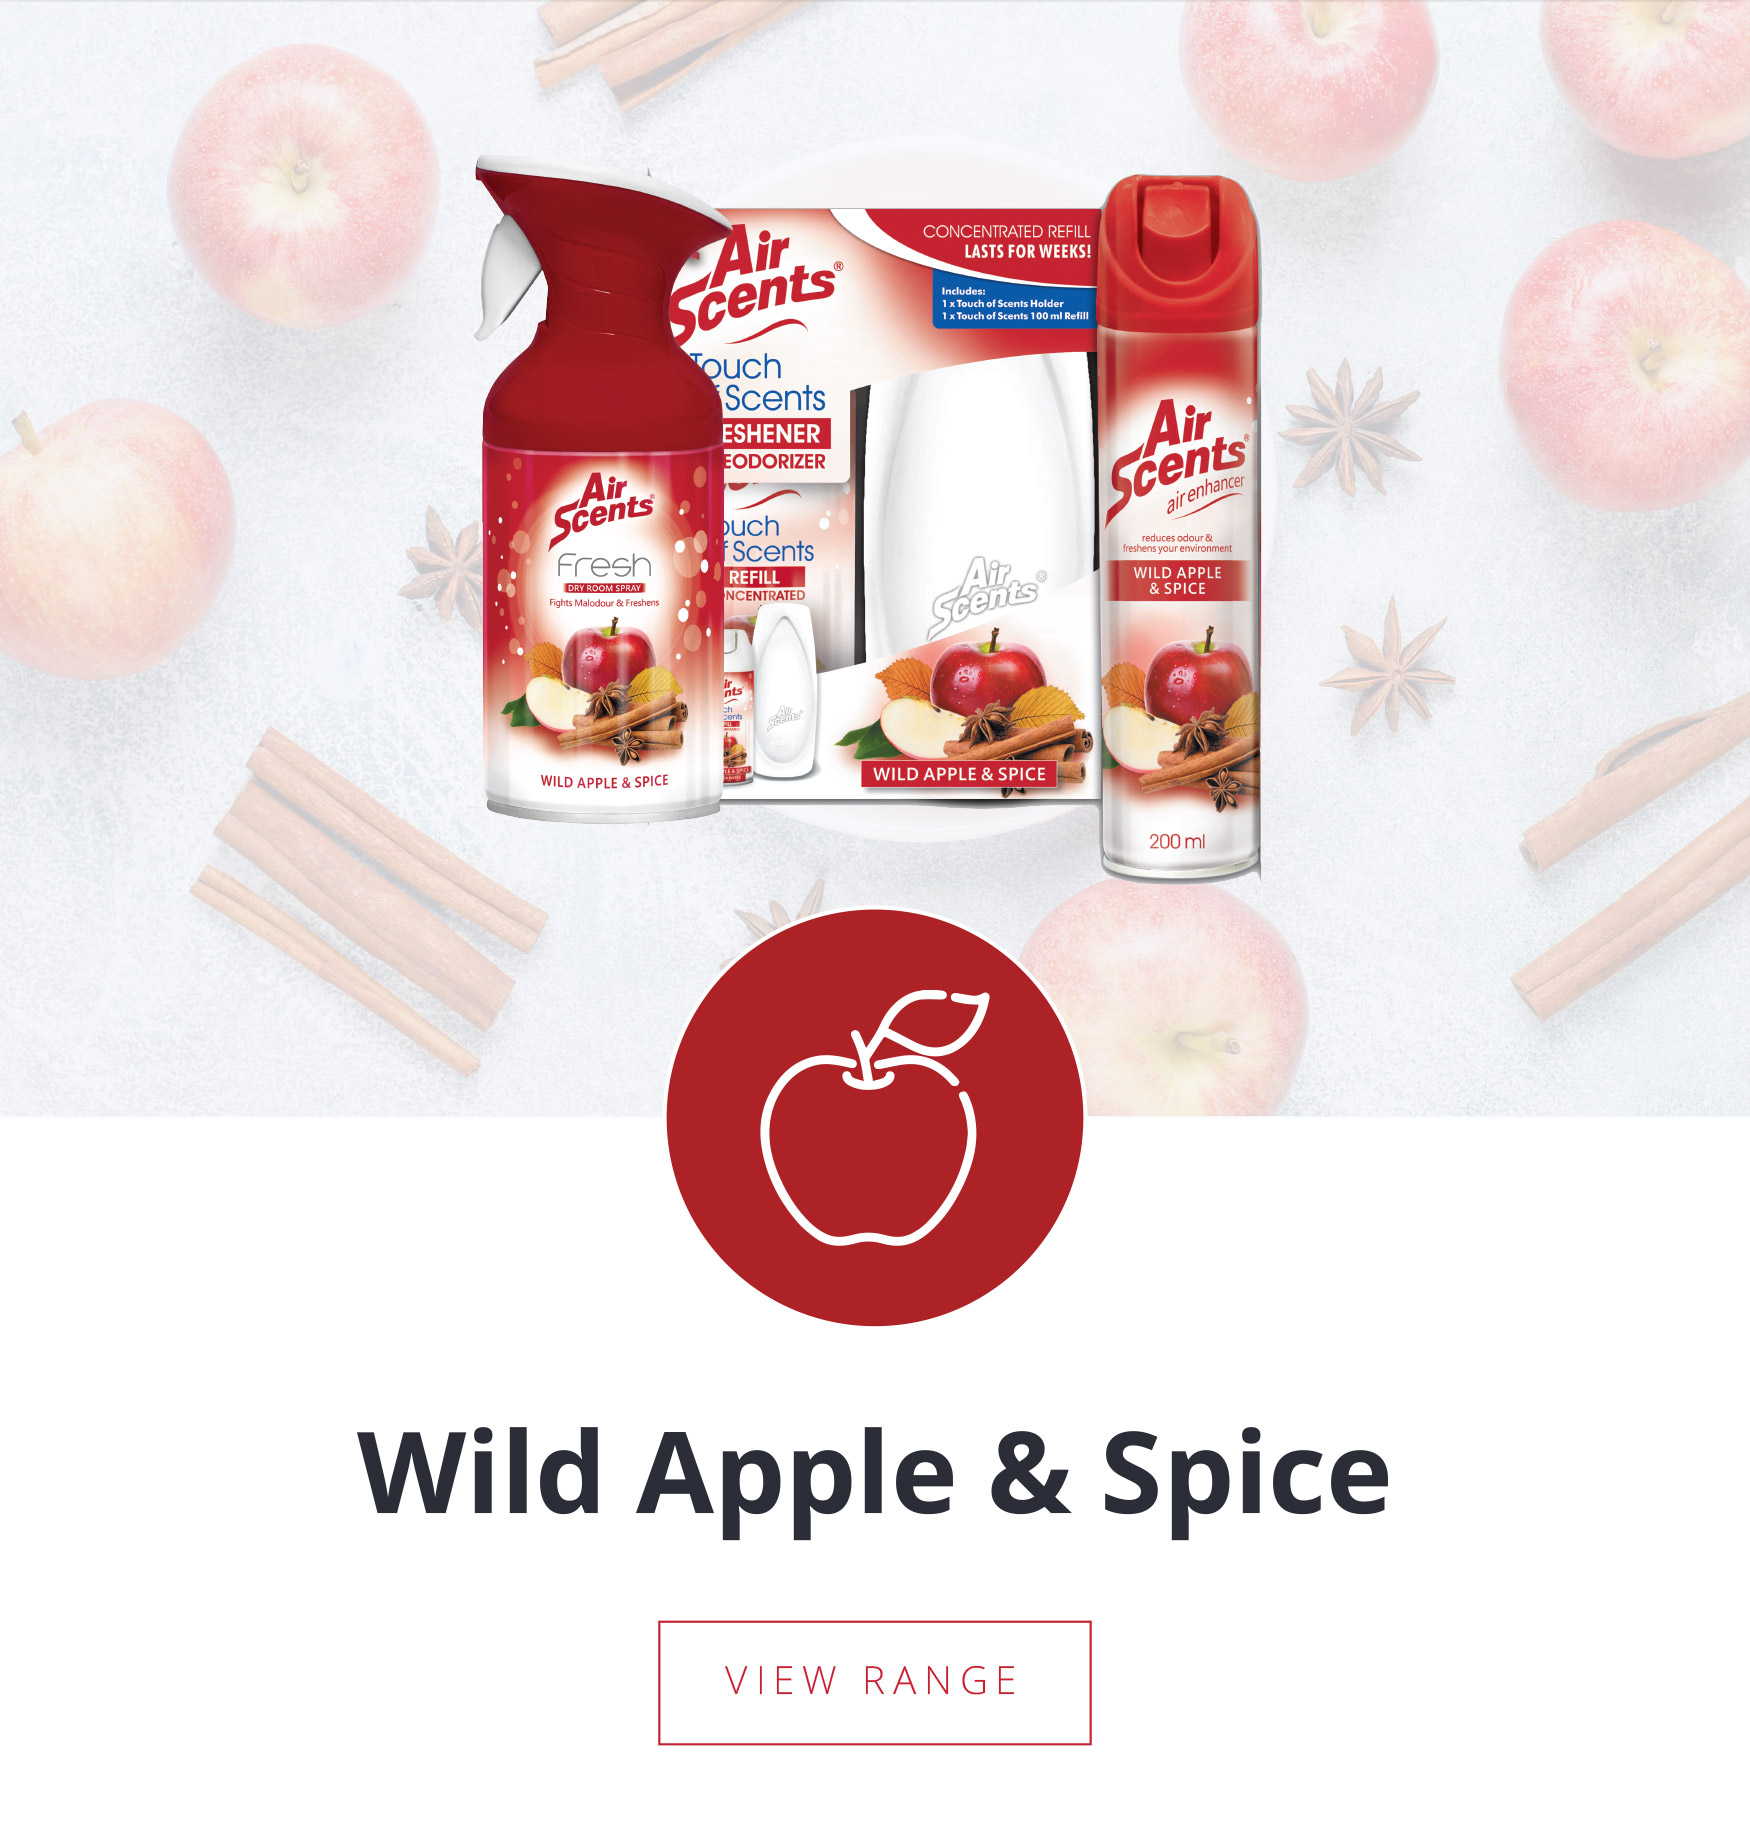 Air Scents Wild Apple & Spice